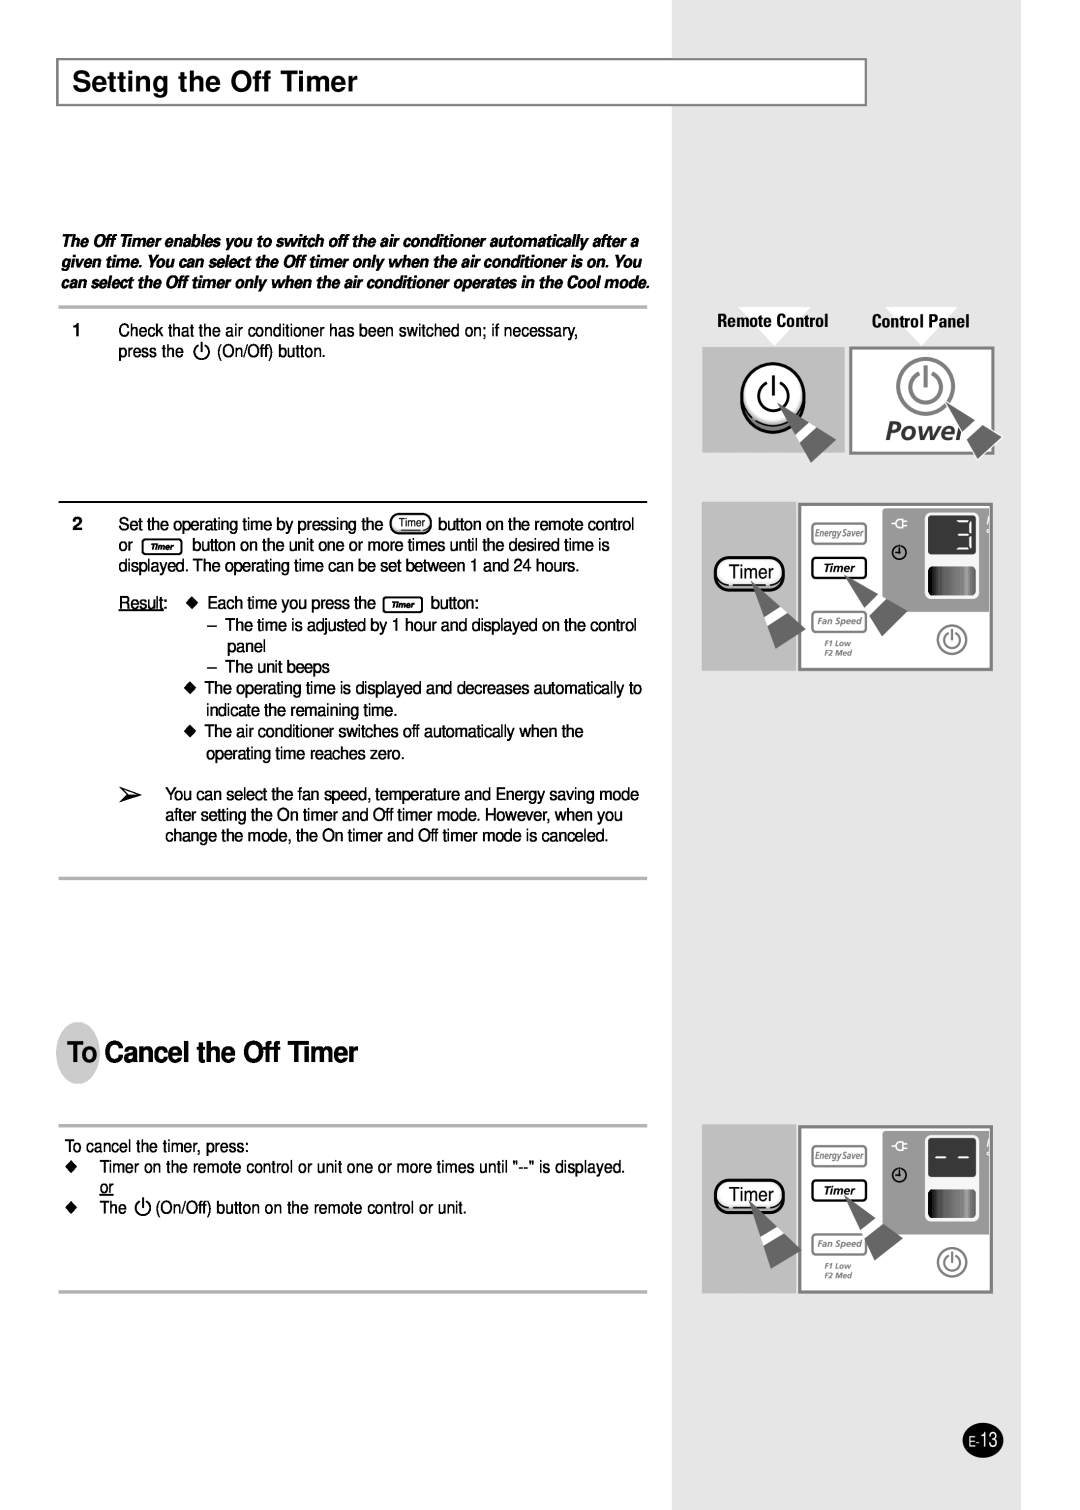 Samsung AW0501B manual Setting the Off Timer, To Cancel the Off Timer, Control Panel, Remote Control 